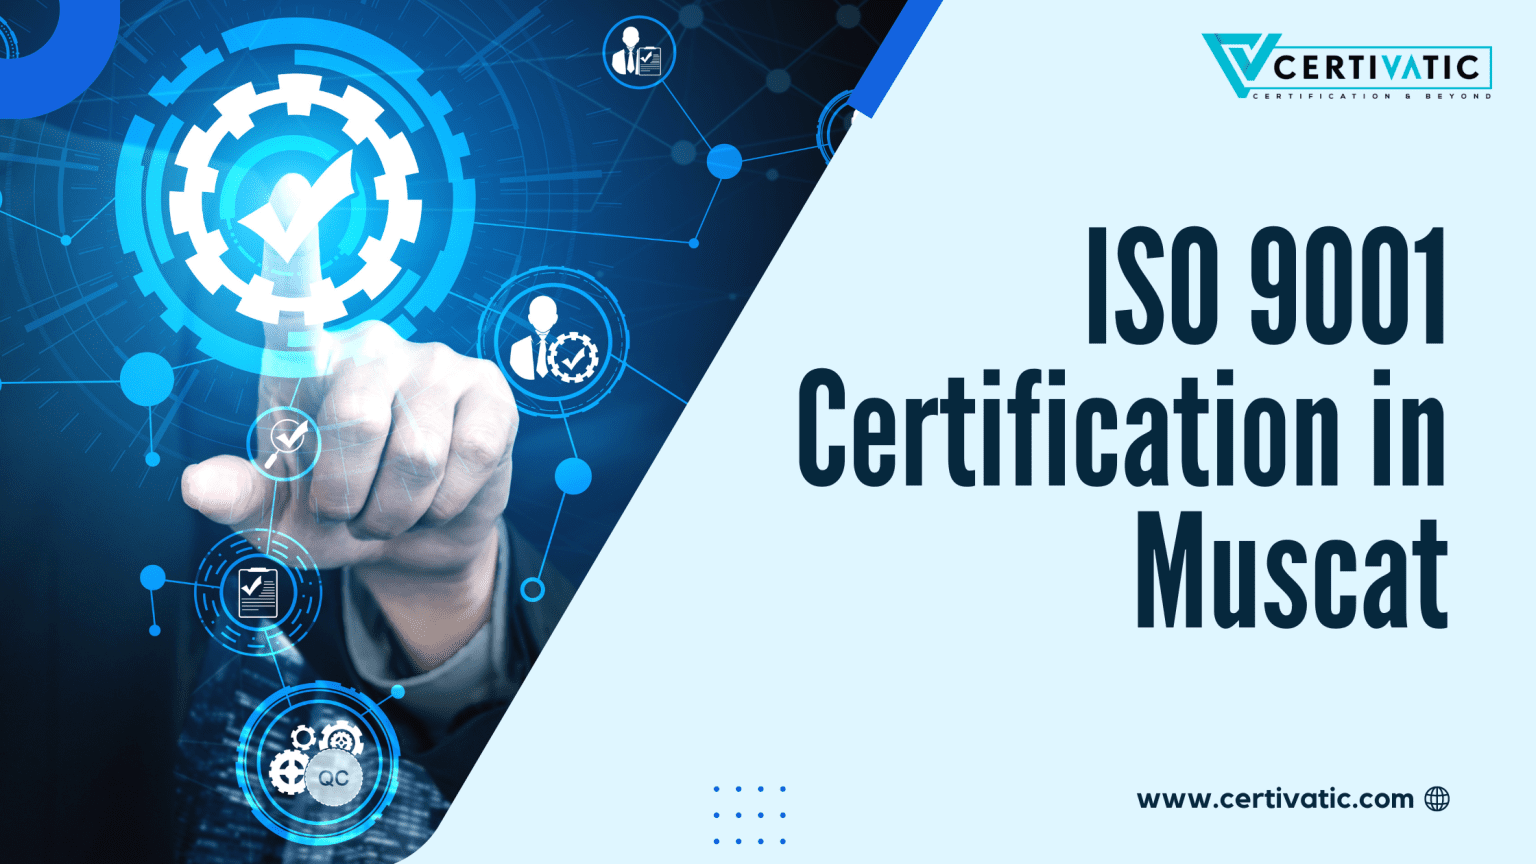 Requirements of ISO 9001 Certification in Muscat